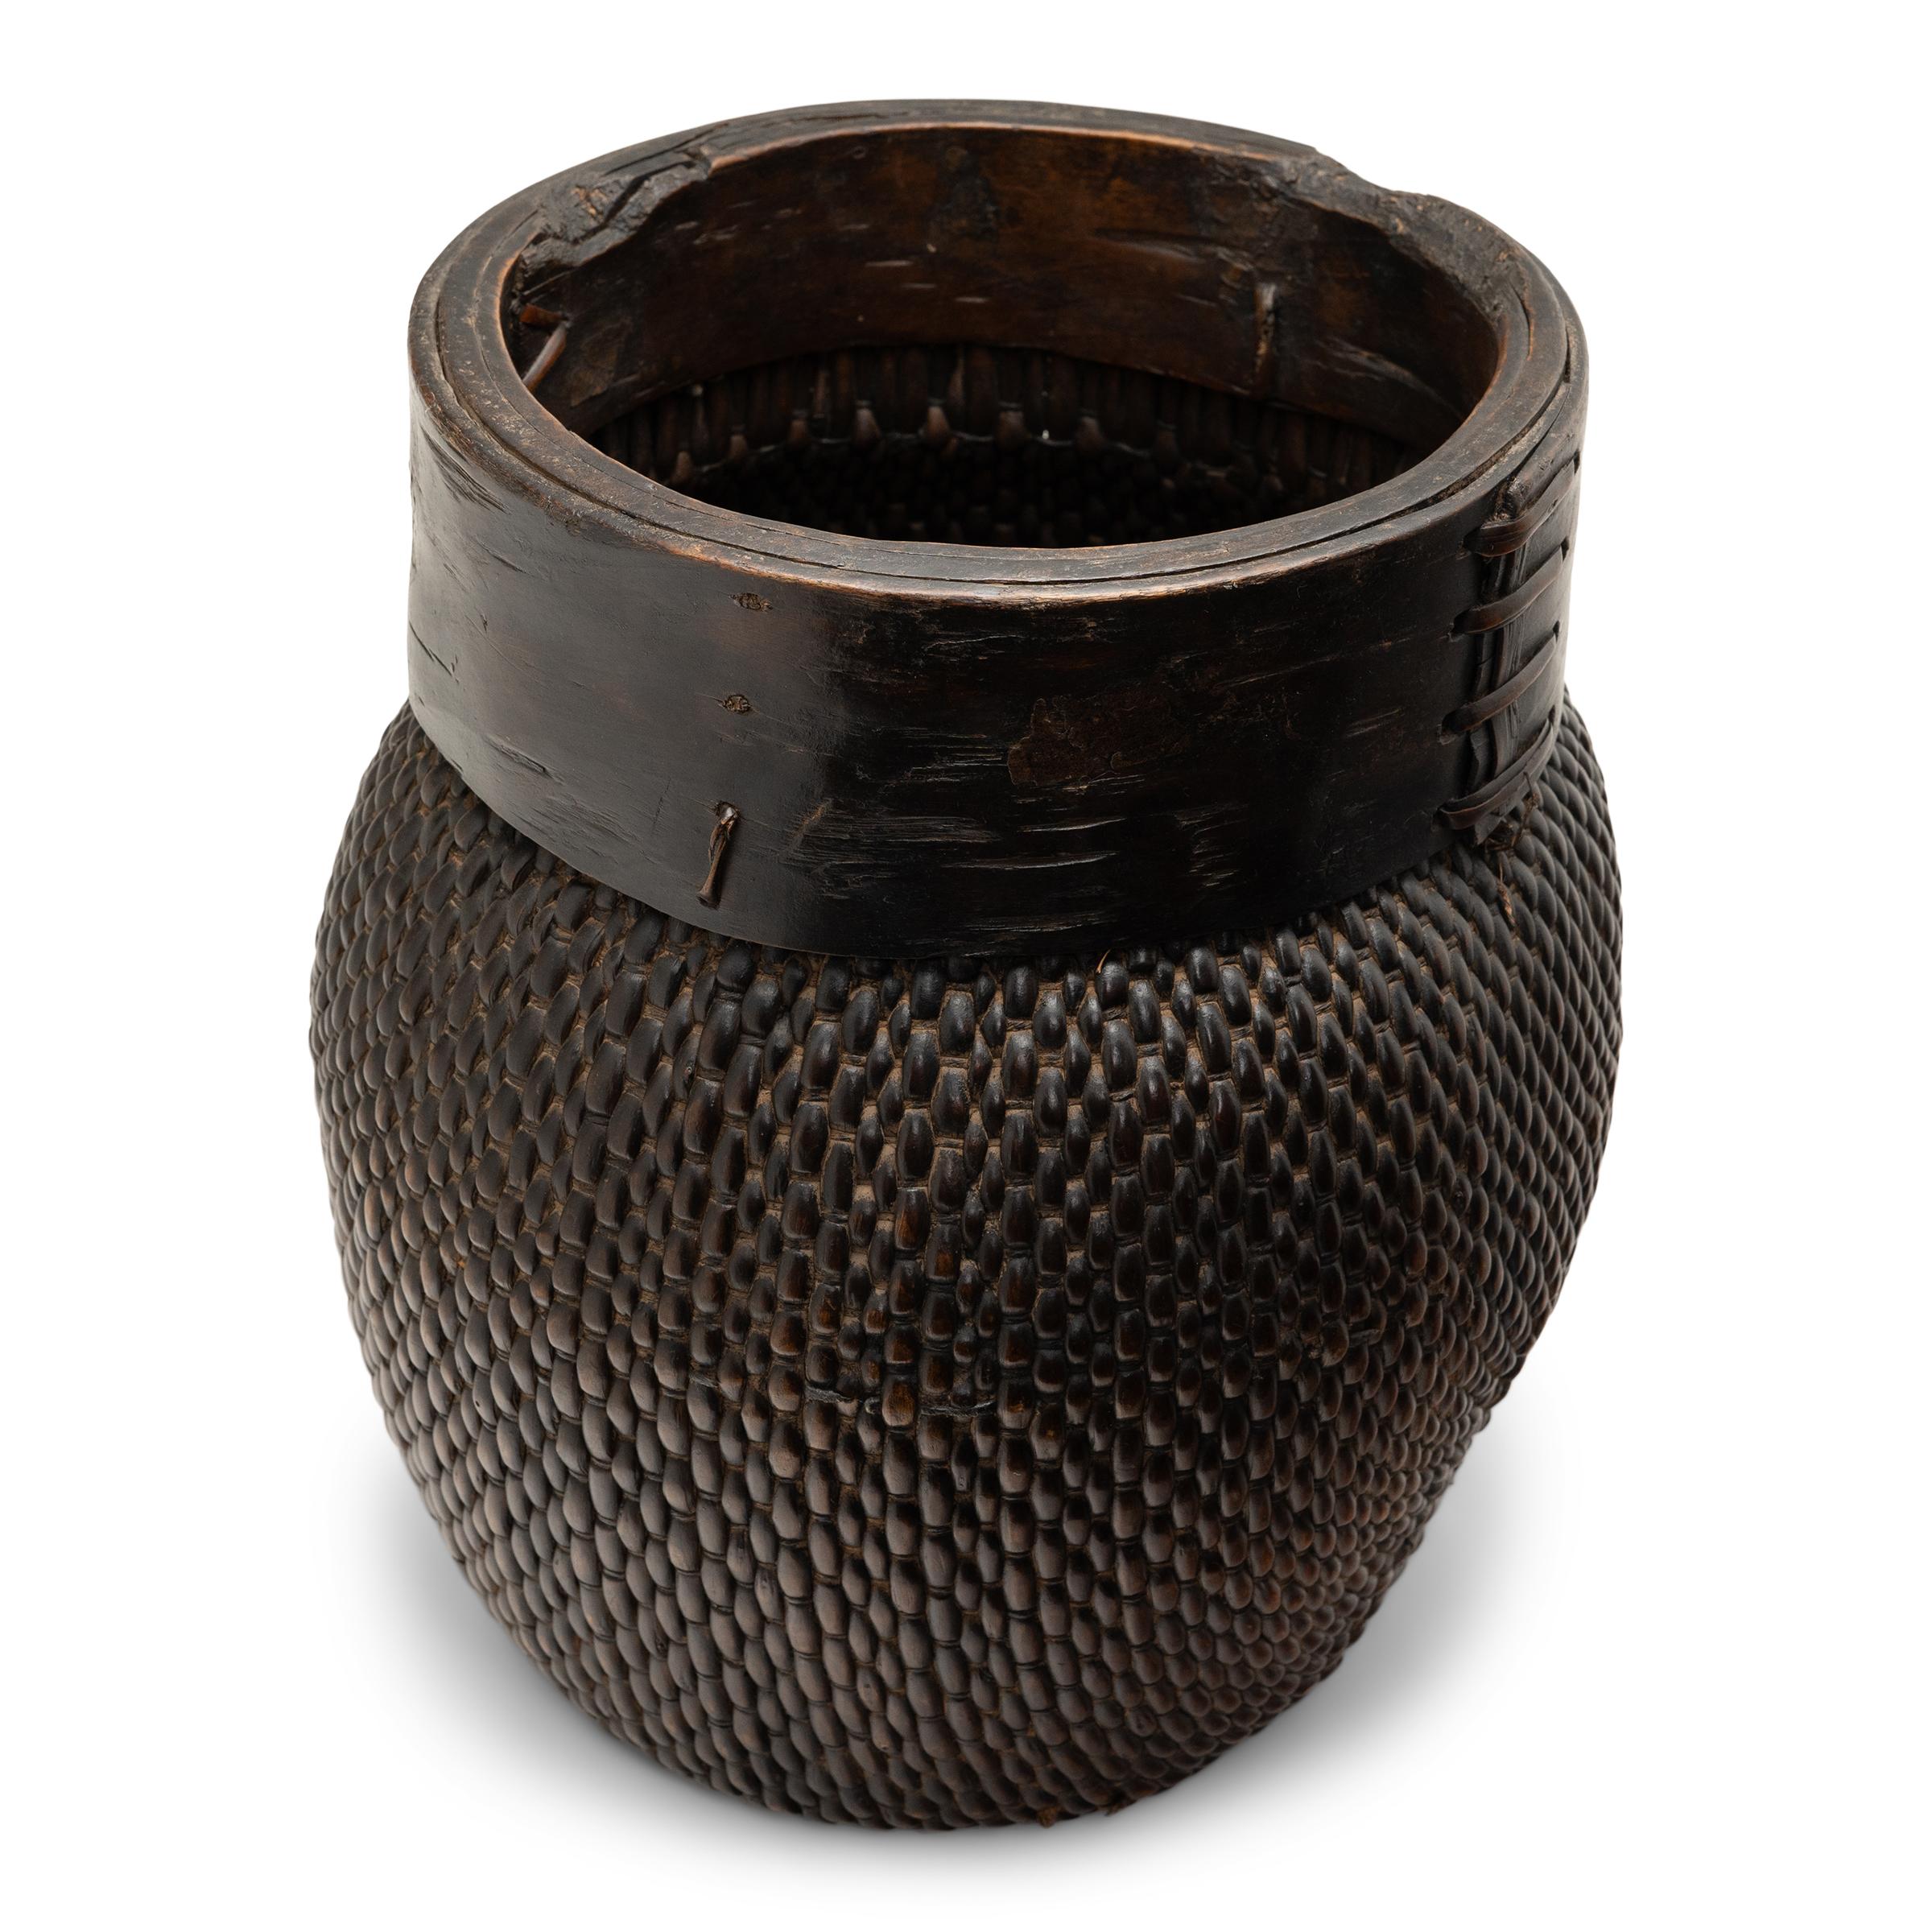 Rustic Chinese Woven River Basket, c. 1900 For Sale